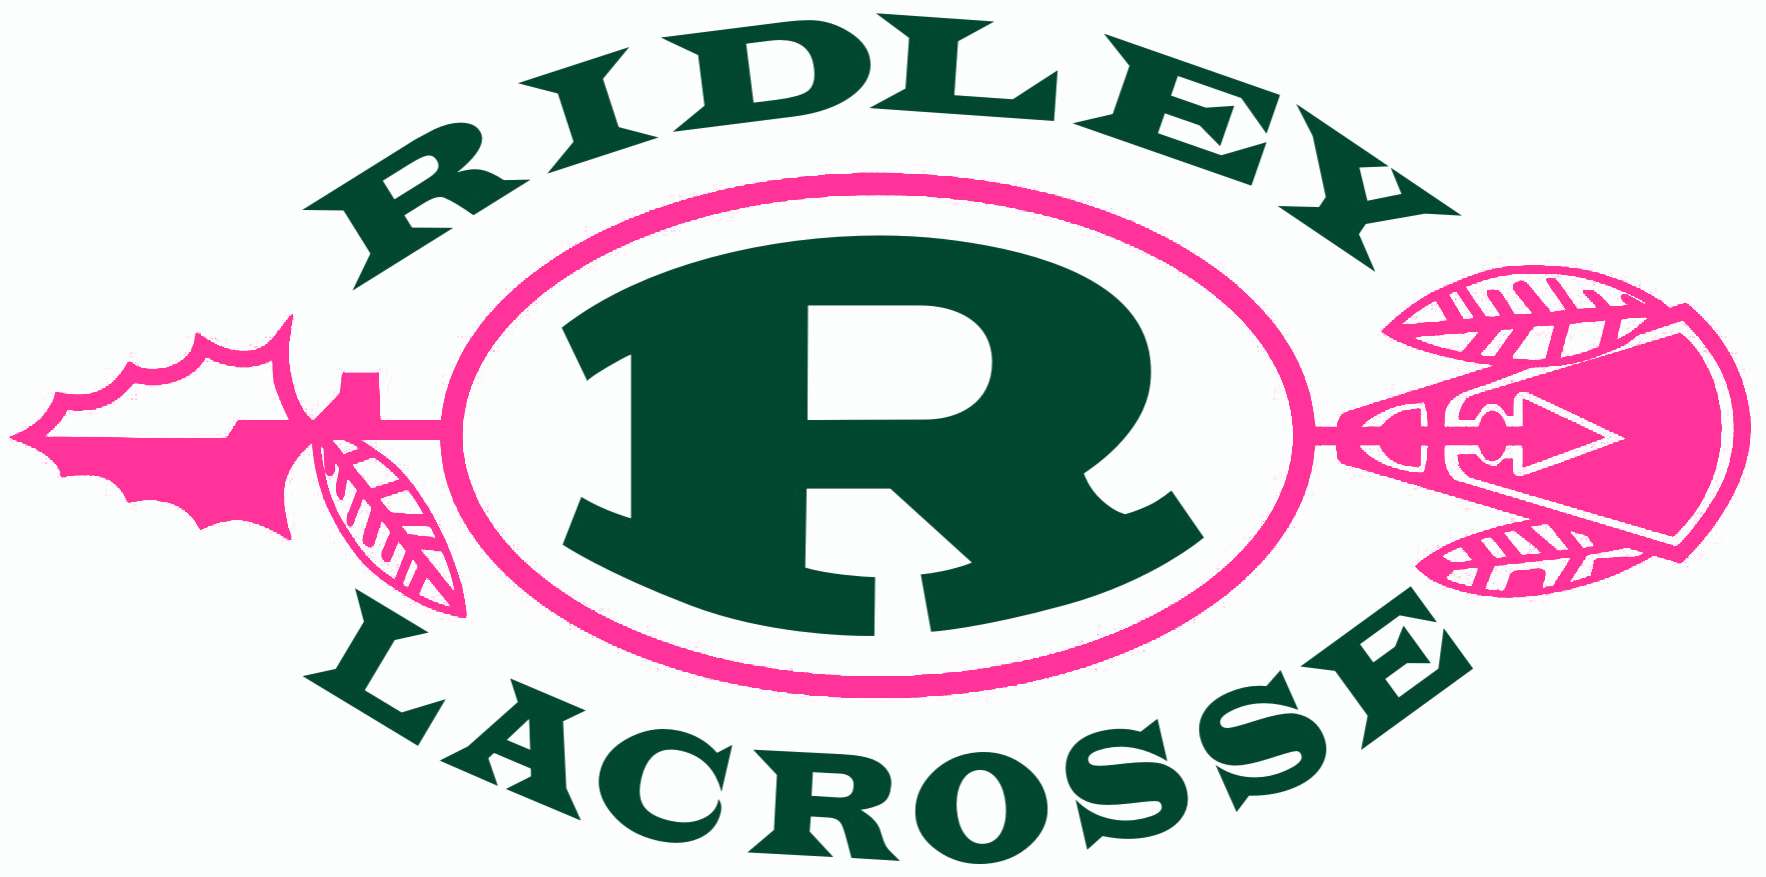 Girls Lax - White Back - Letters